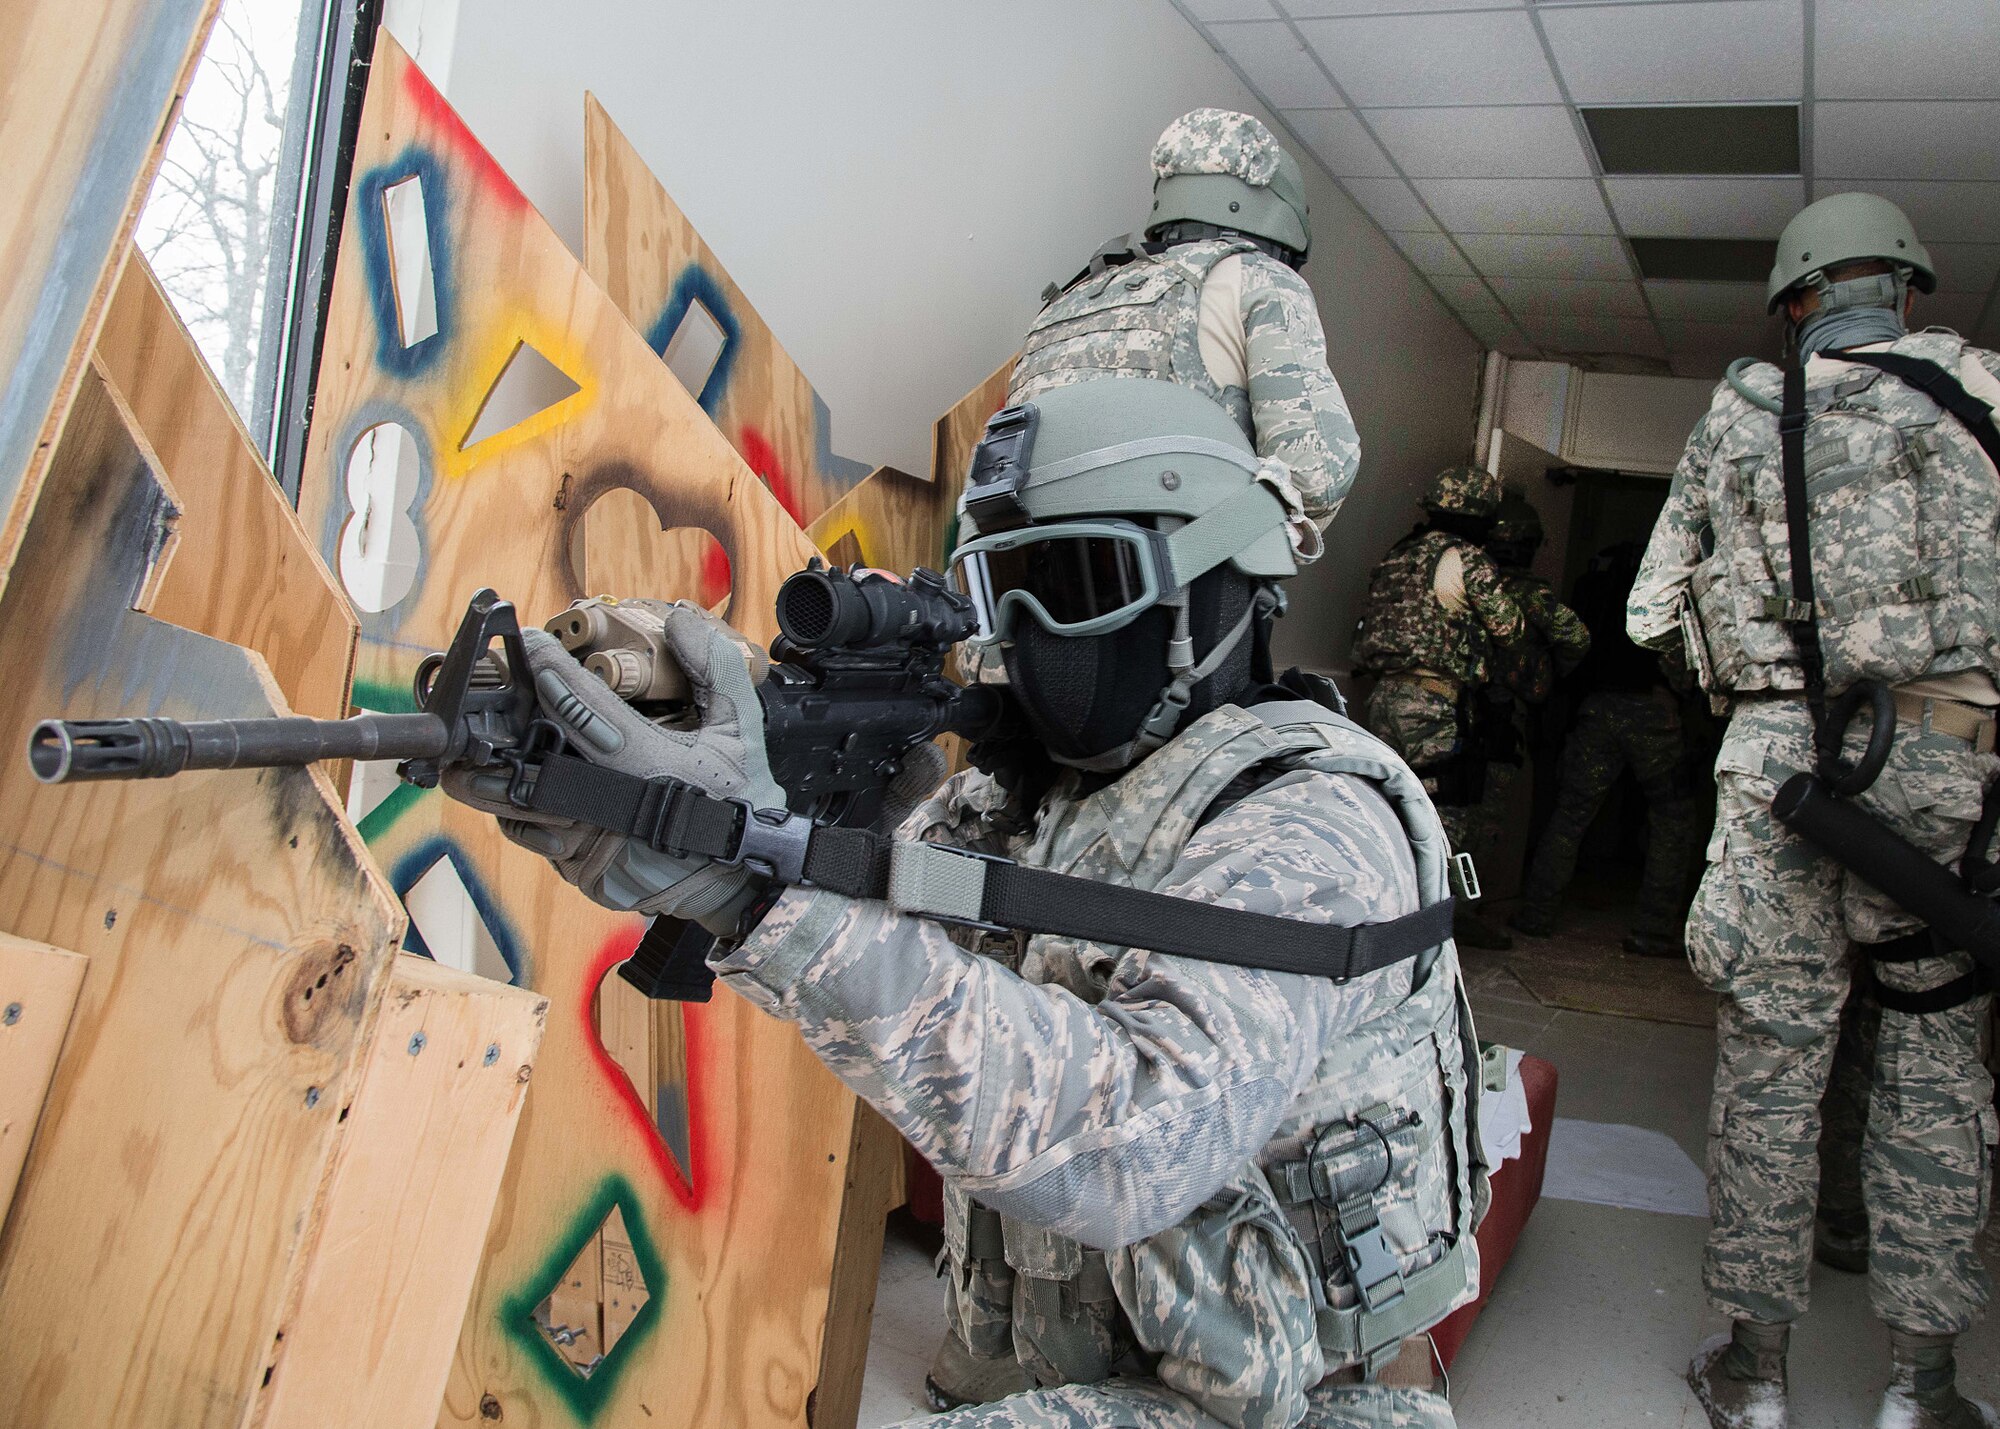 Senior Airman Nicholas Wright, 66th Security Forces Squadron Special Response Team member, supports other team members as they enter an unoccupied building at Hanscom Air Force Base, Mass., during a bimonthly training exercise Jan. 22. The specialized teams operate similar to a civilian Special Weapons and Tactics, or SWAT, team, and must be ready at a moment's notice. (U.S. Air Force photo by Mark Herlihy)